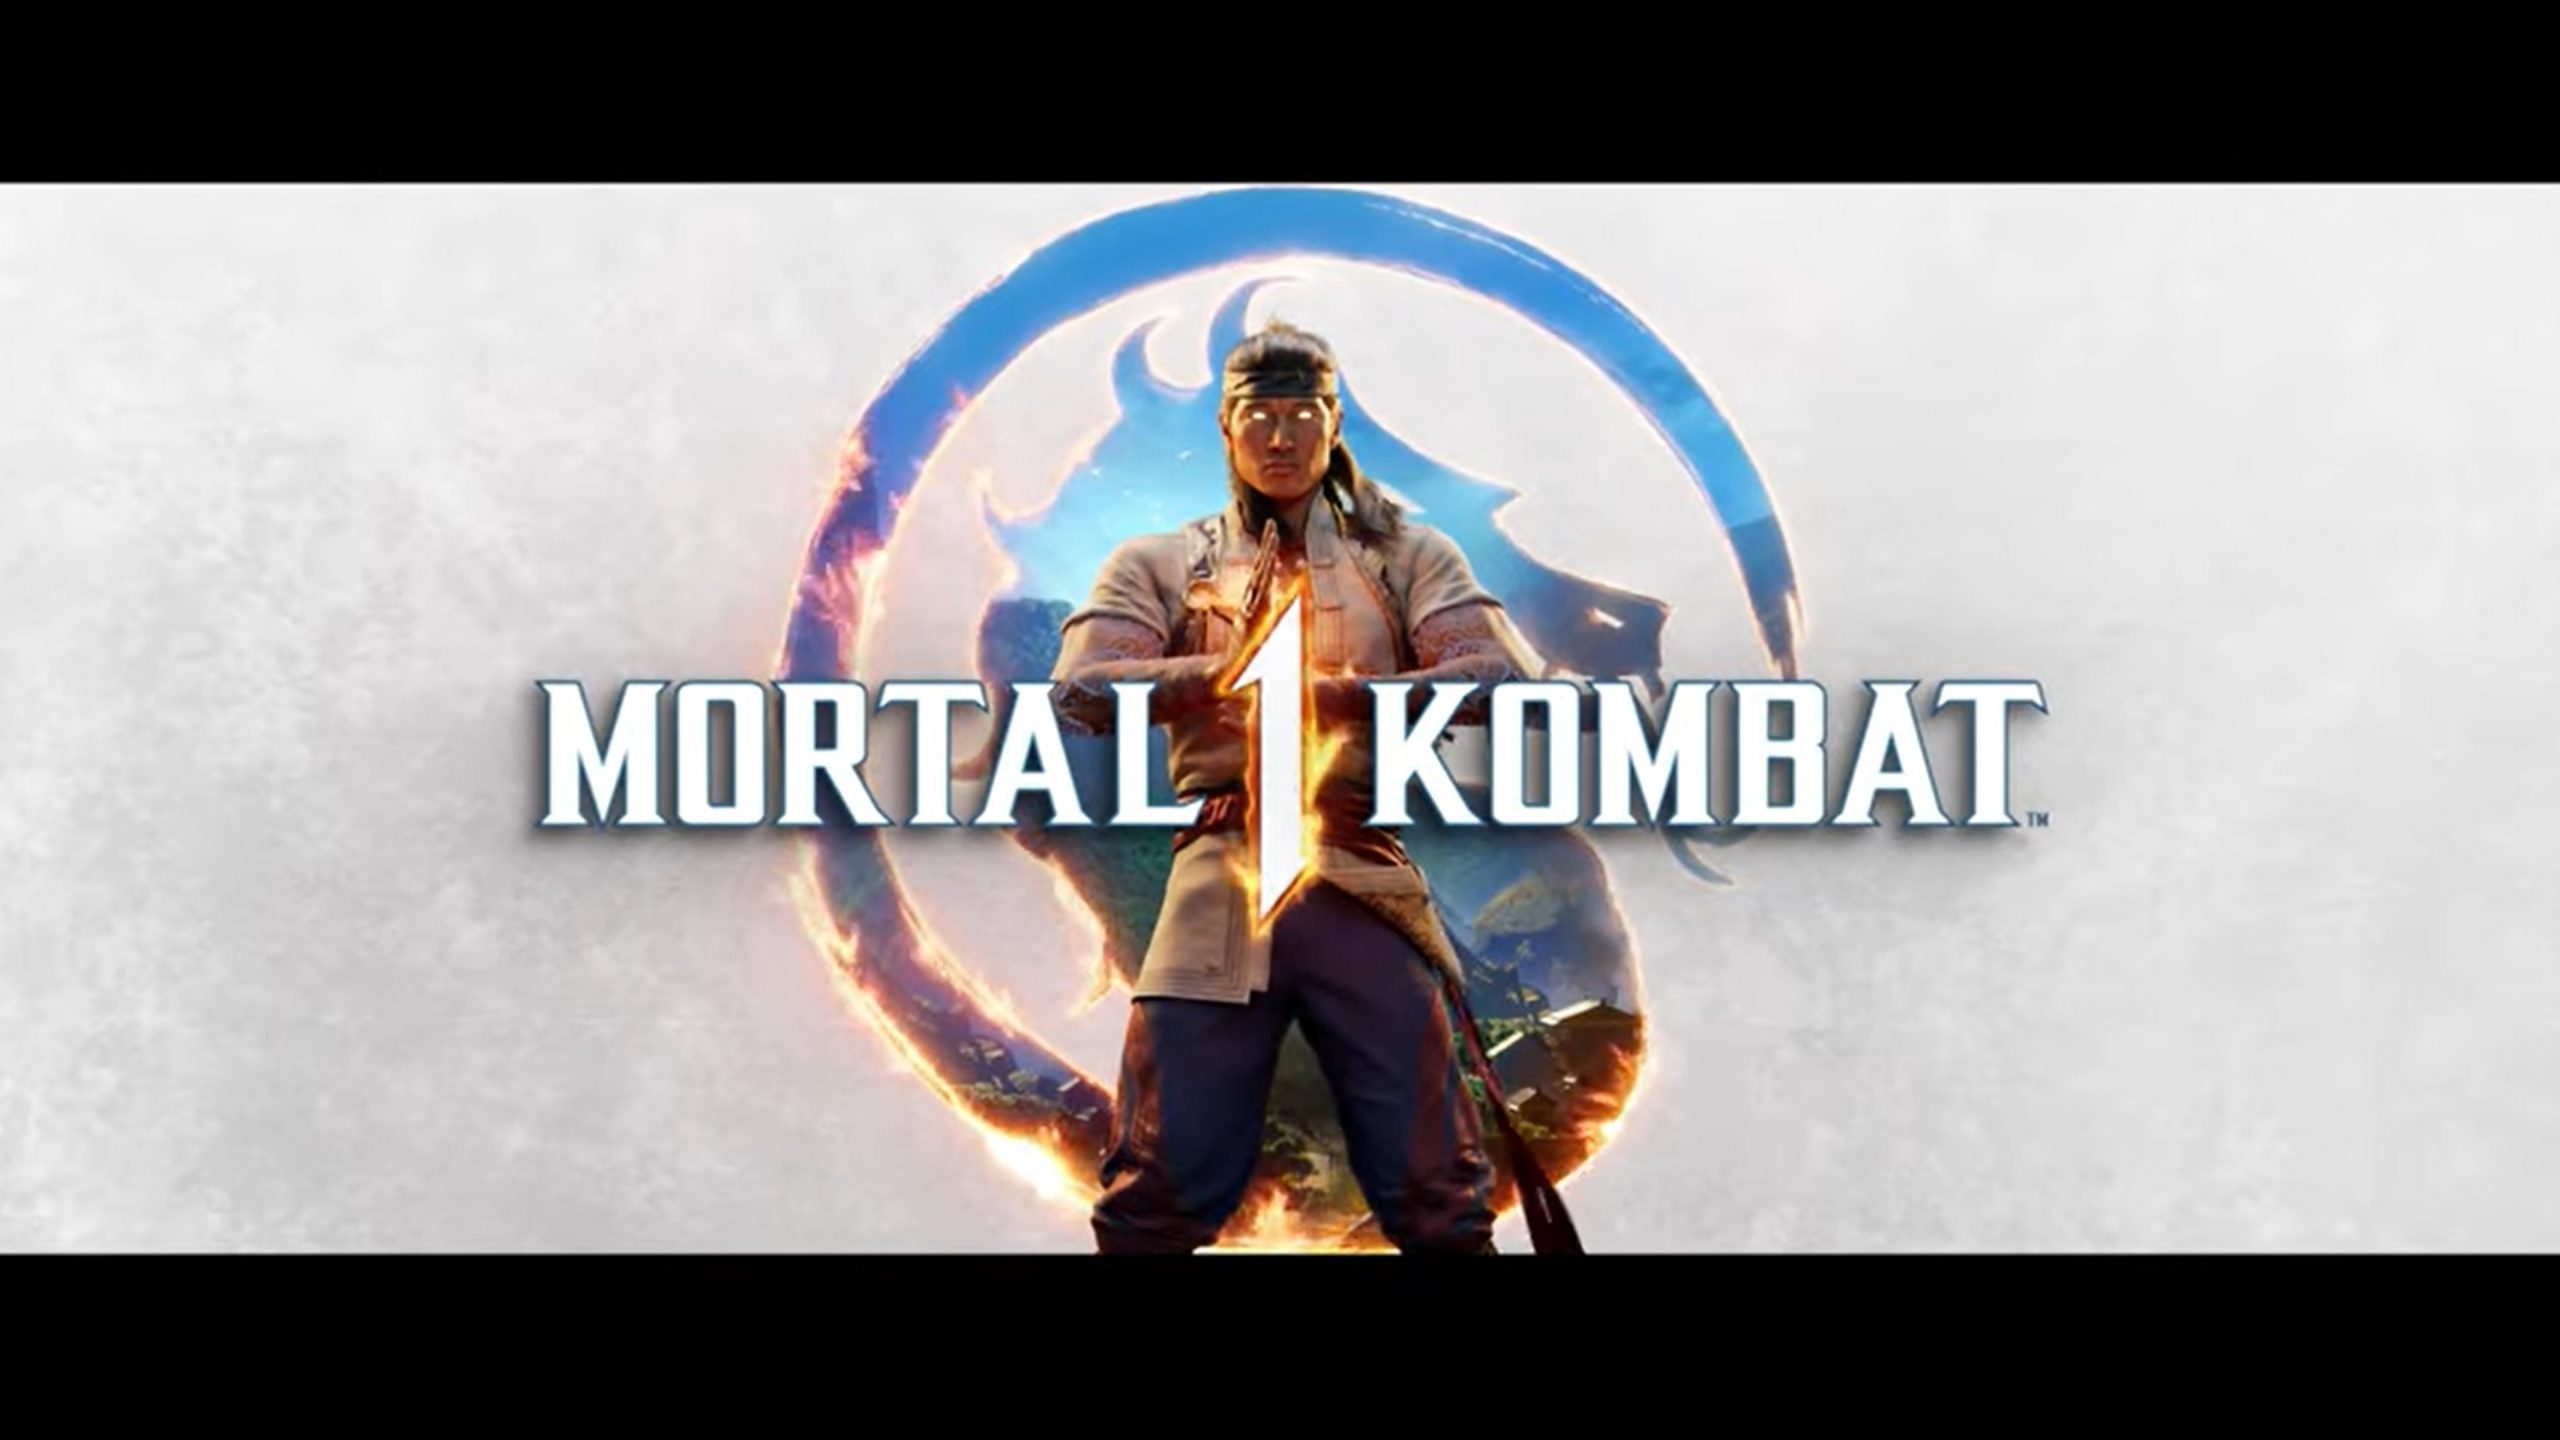 Mortal Kombat 1 announced for Switch